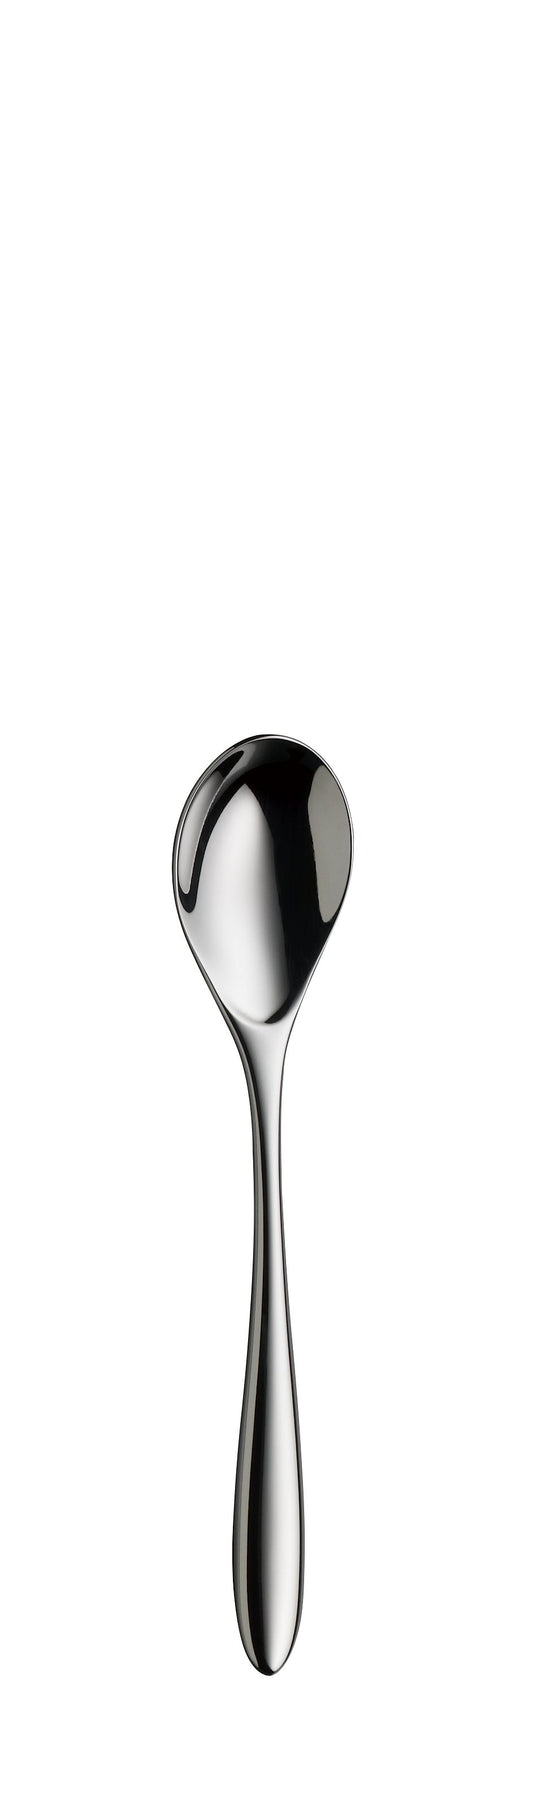 Coffee spoon AVES silver plated 136mm